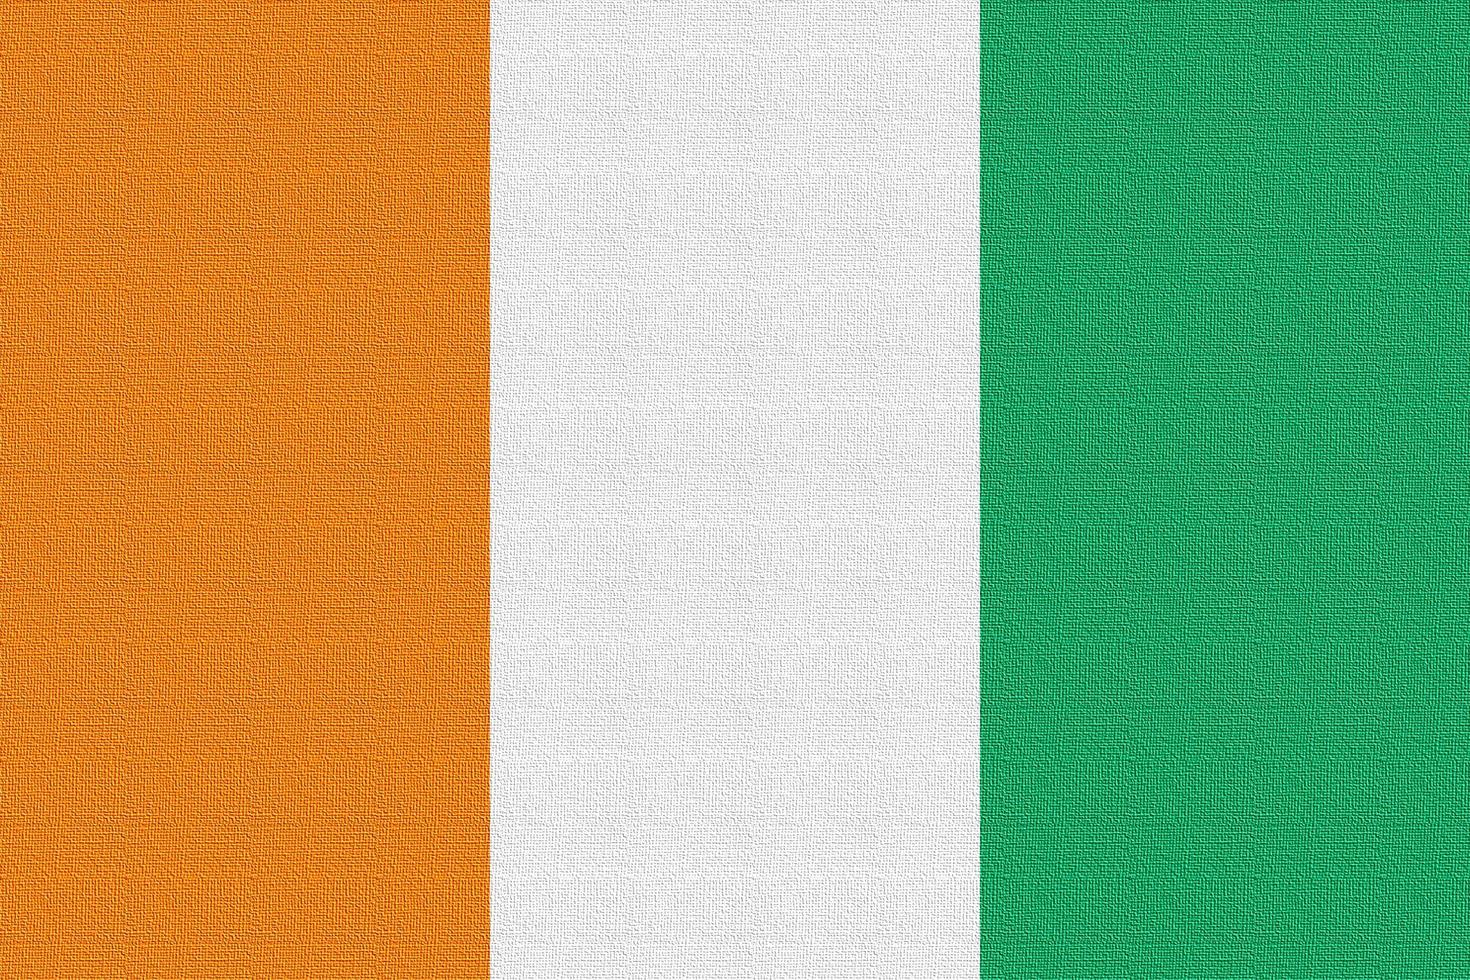 Illustration of the national flag of Cote d Ivoire photo